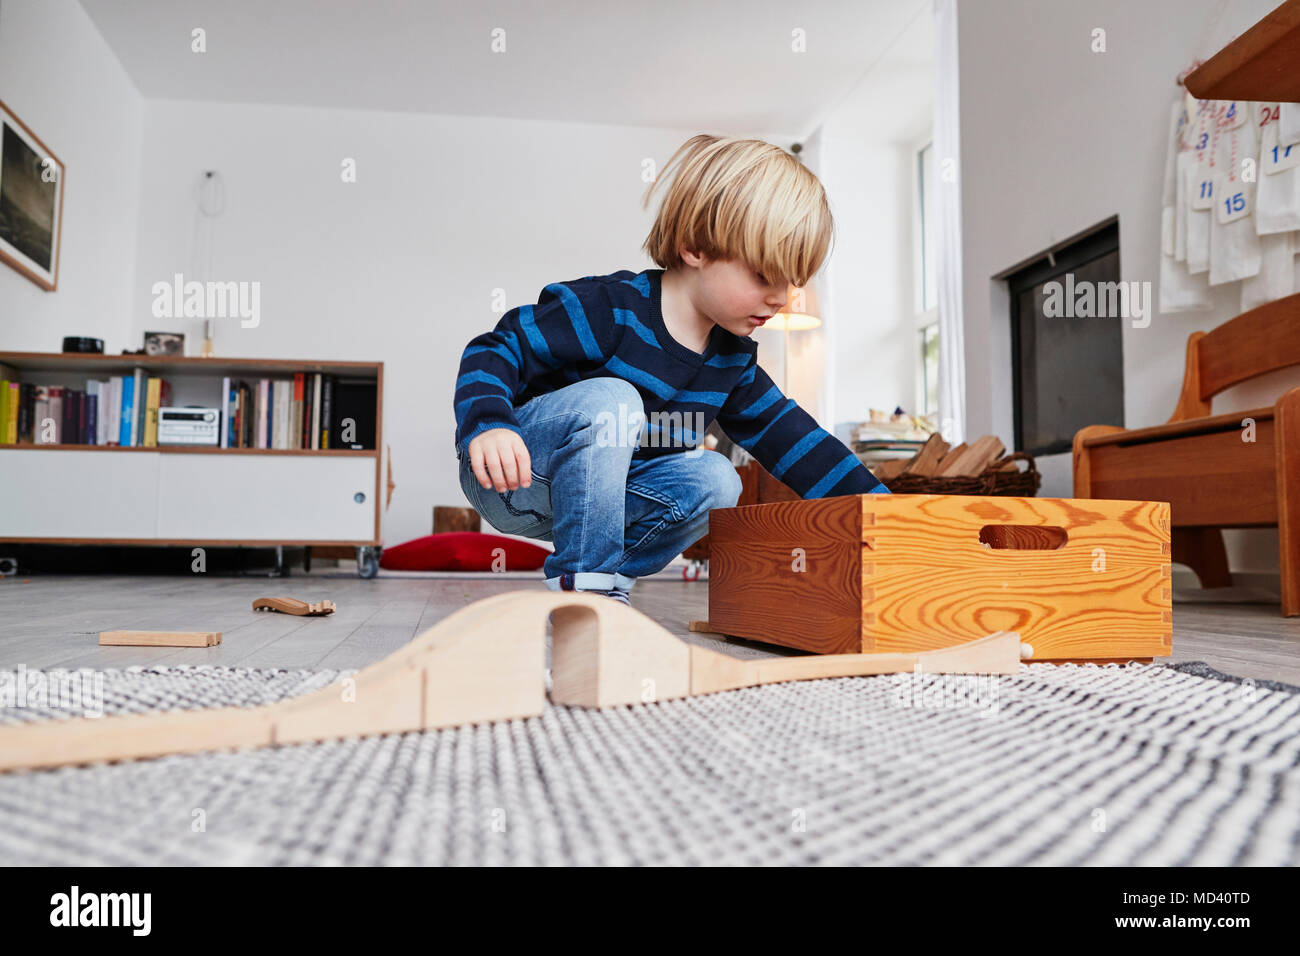 Young boy playing with toys in living room, low angle view Stock Photo